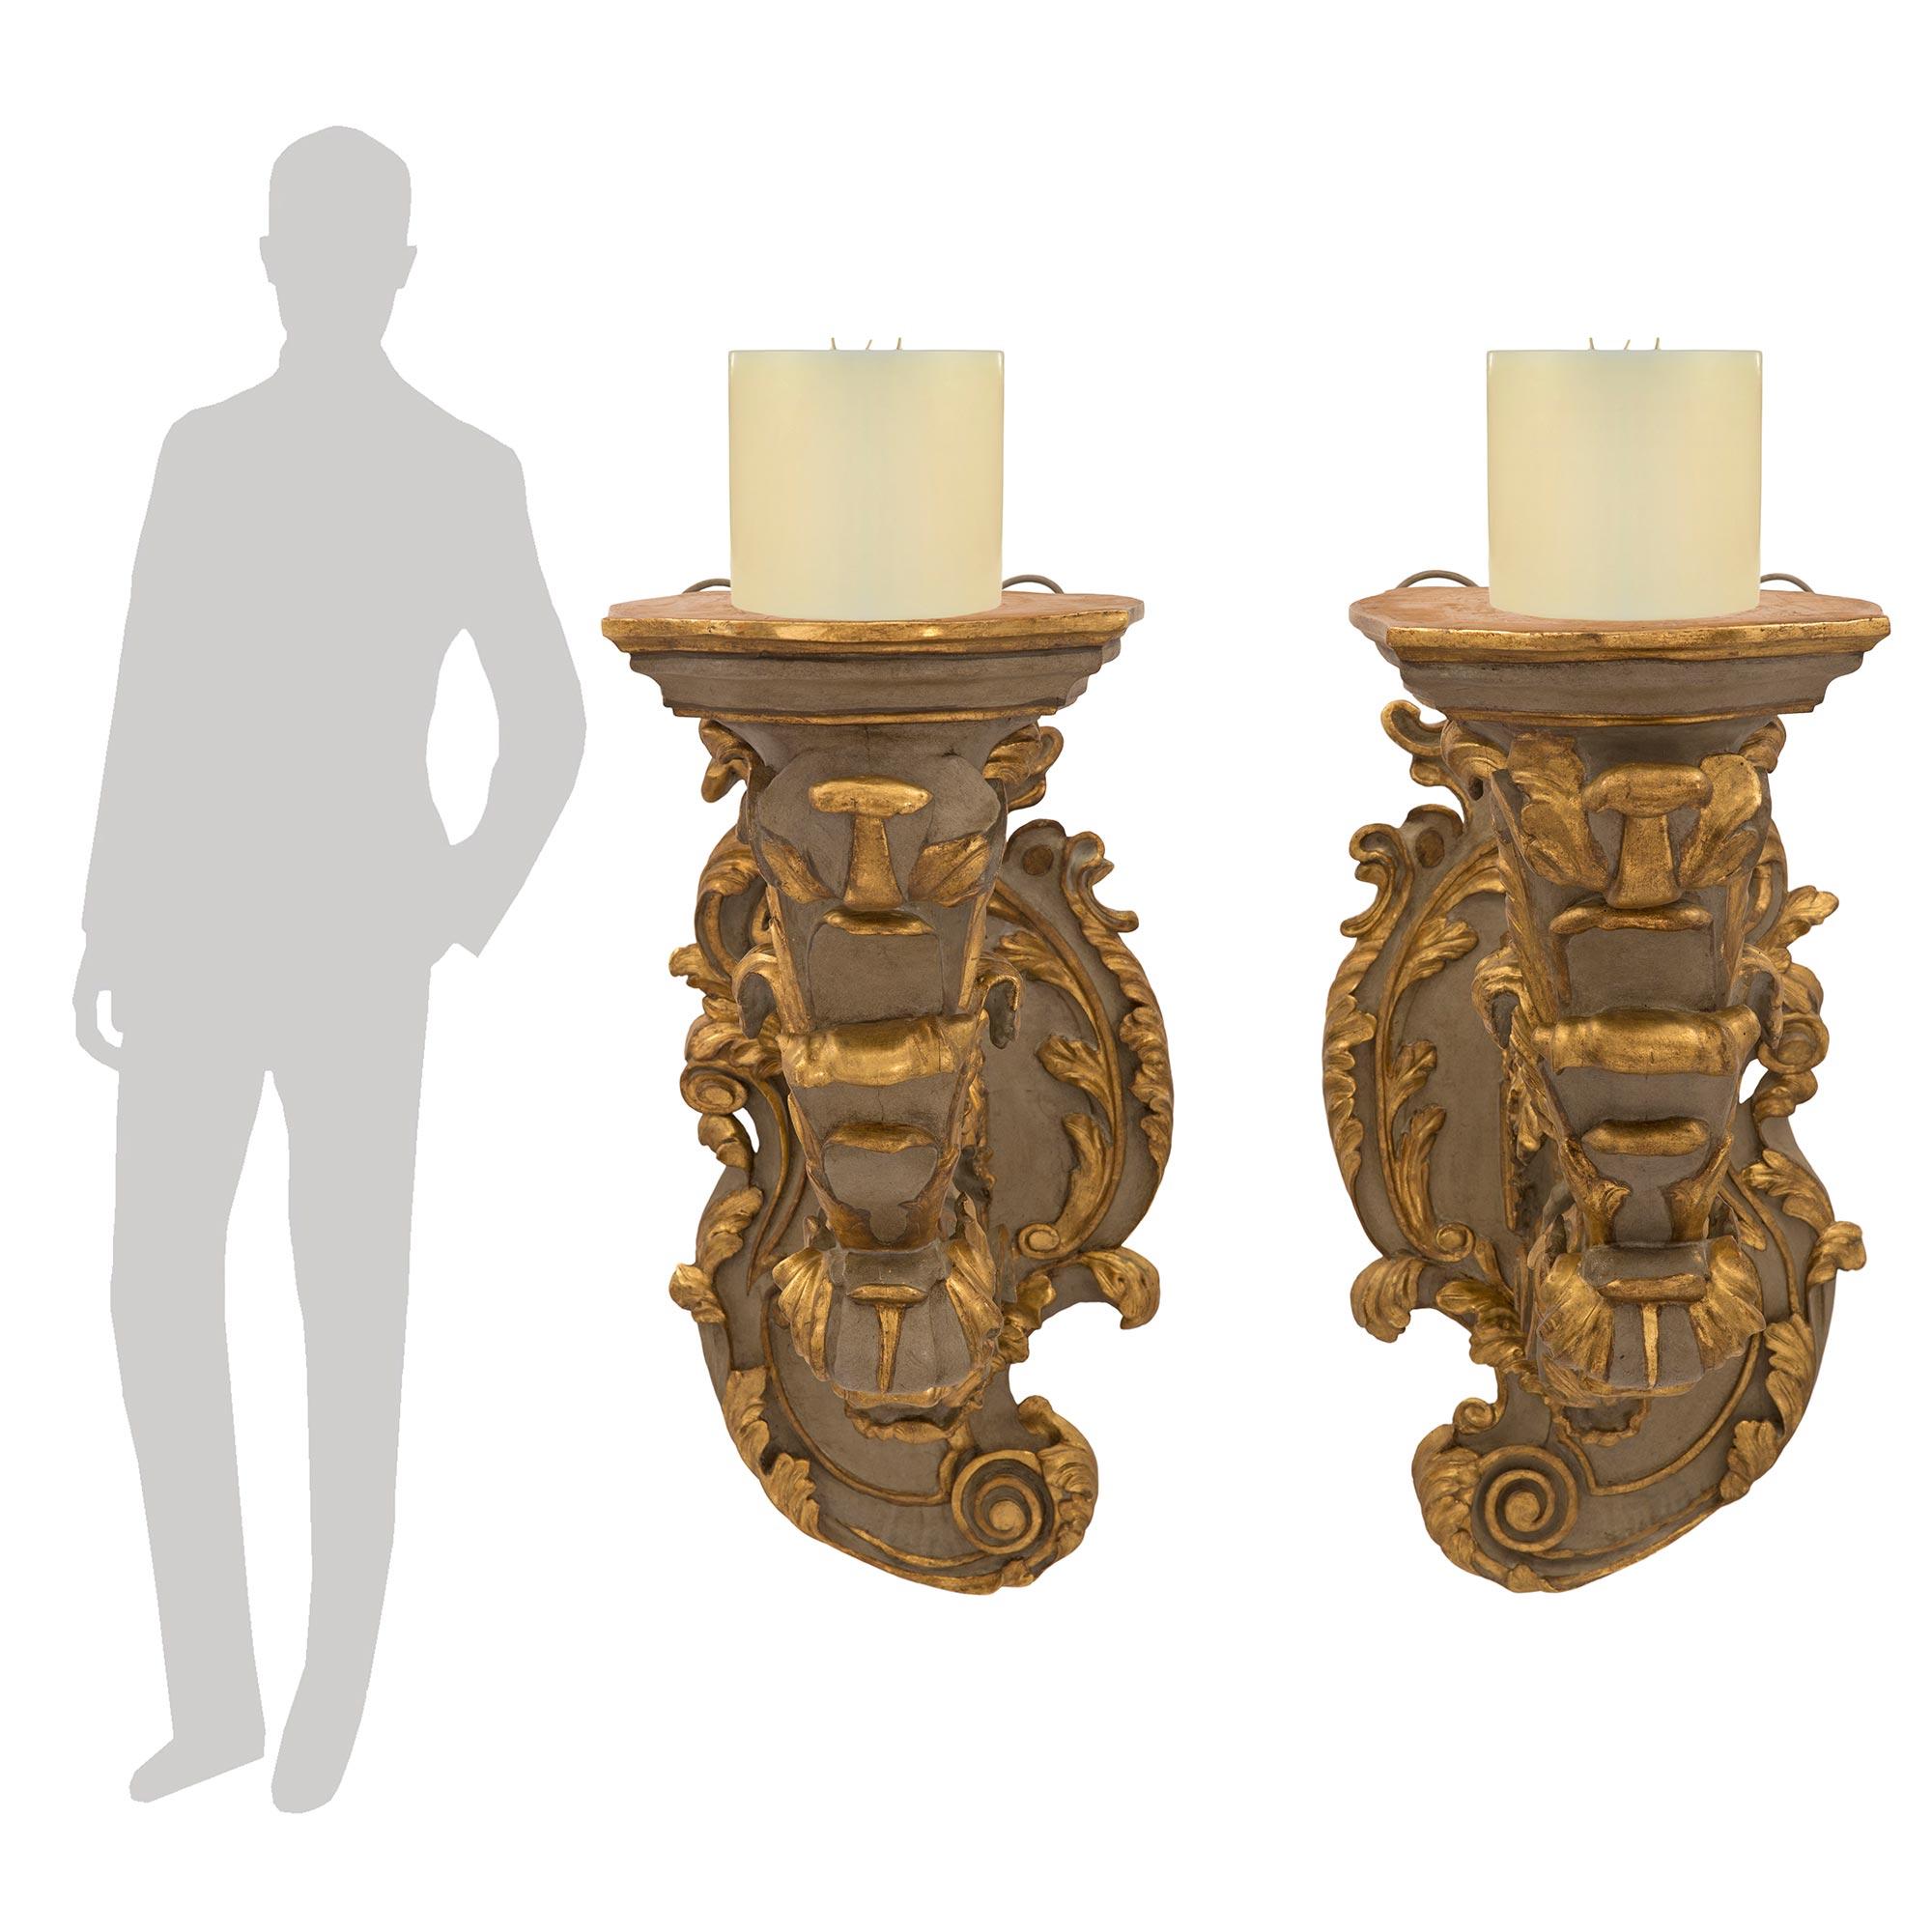 A stunning and most impressive true pair of Italian 18th century Baroque period patinated and giltwood sconces. Each sconce is centered by a beautiful and most decorative backplate with richly carved scrolled foliate designs with gilt accents. The